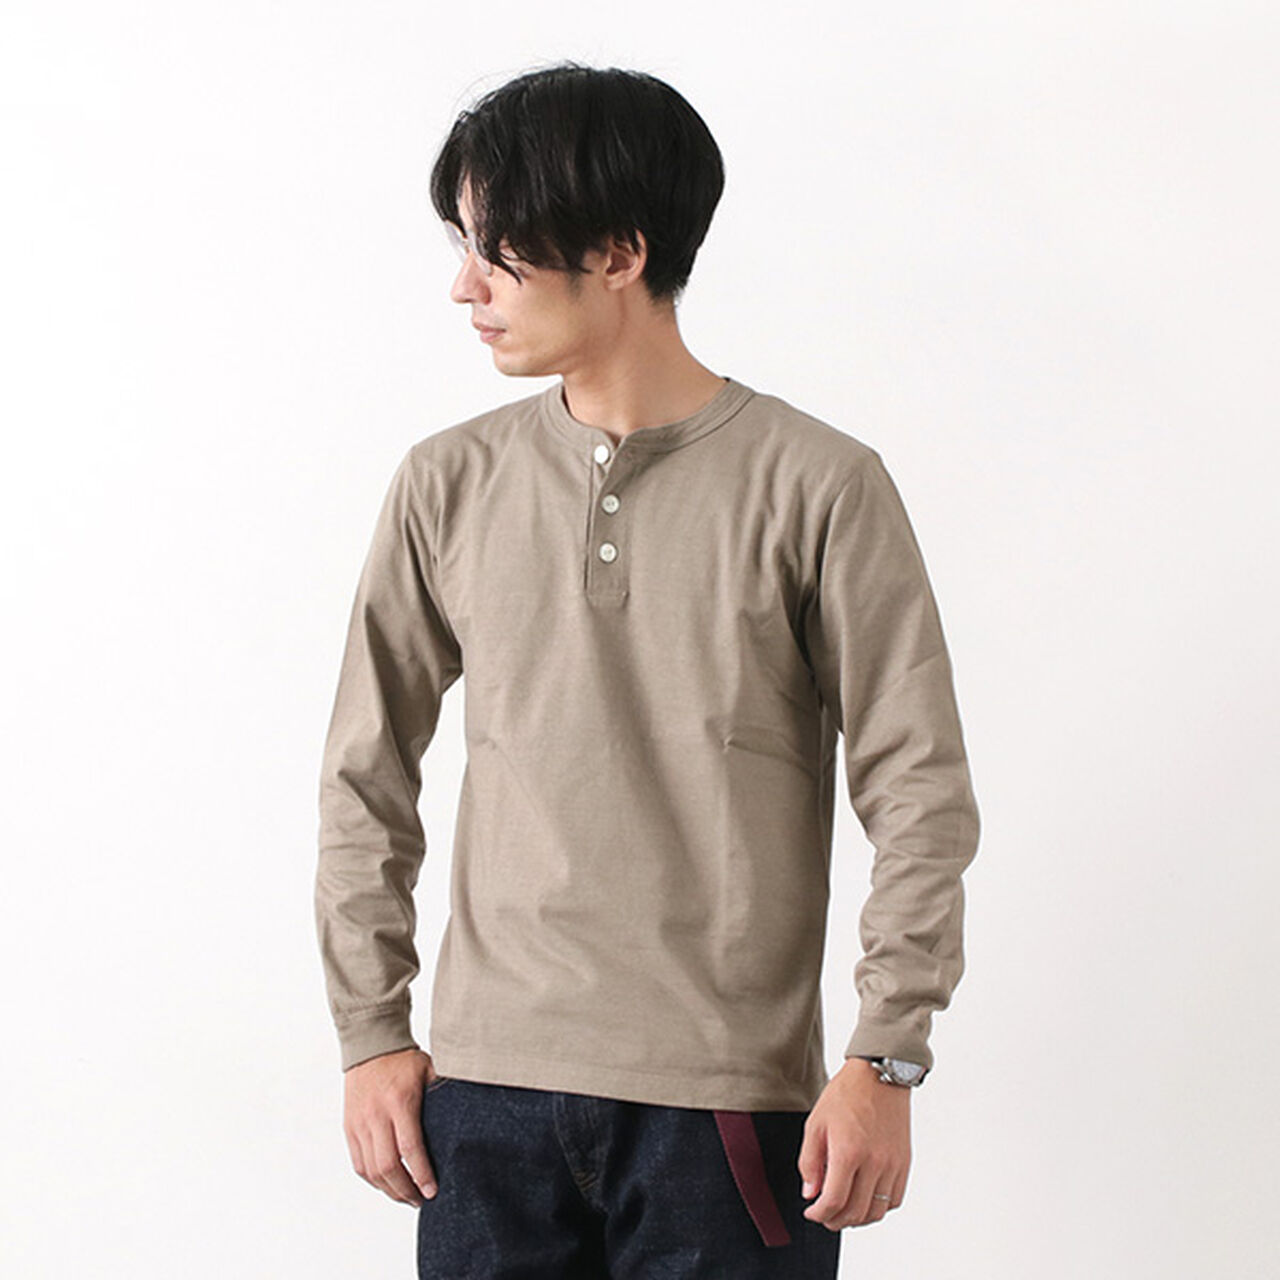 BR-3044 Small Knitted Henley Neck L/S T-shirt,Khaki, large image number 0